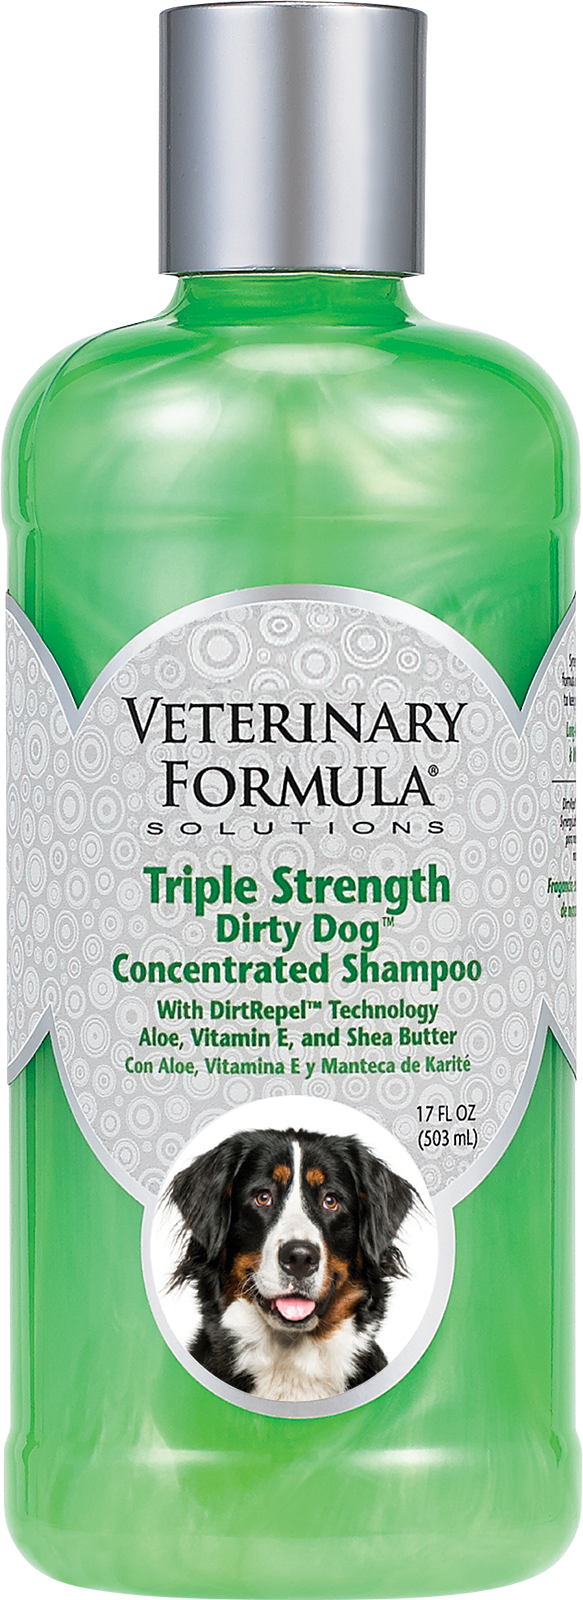 Triple Strength Dirty Dog Concentrated Shampoo